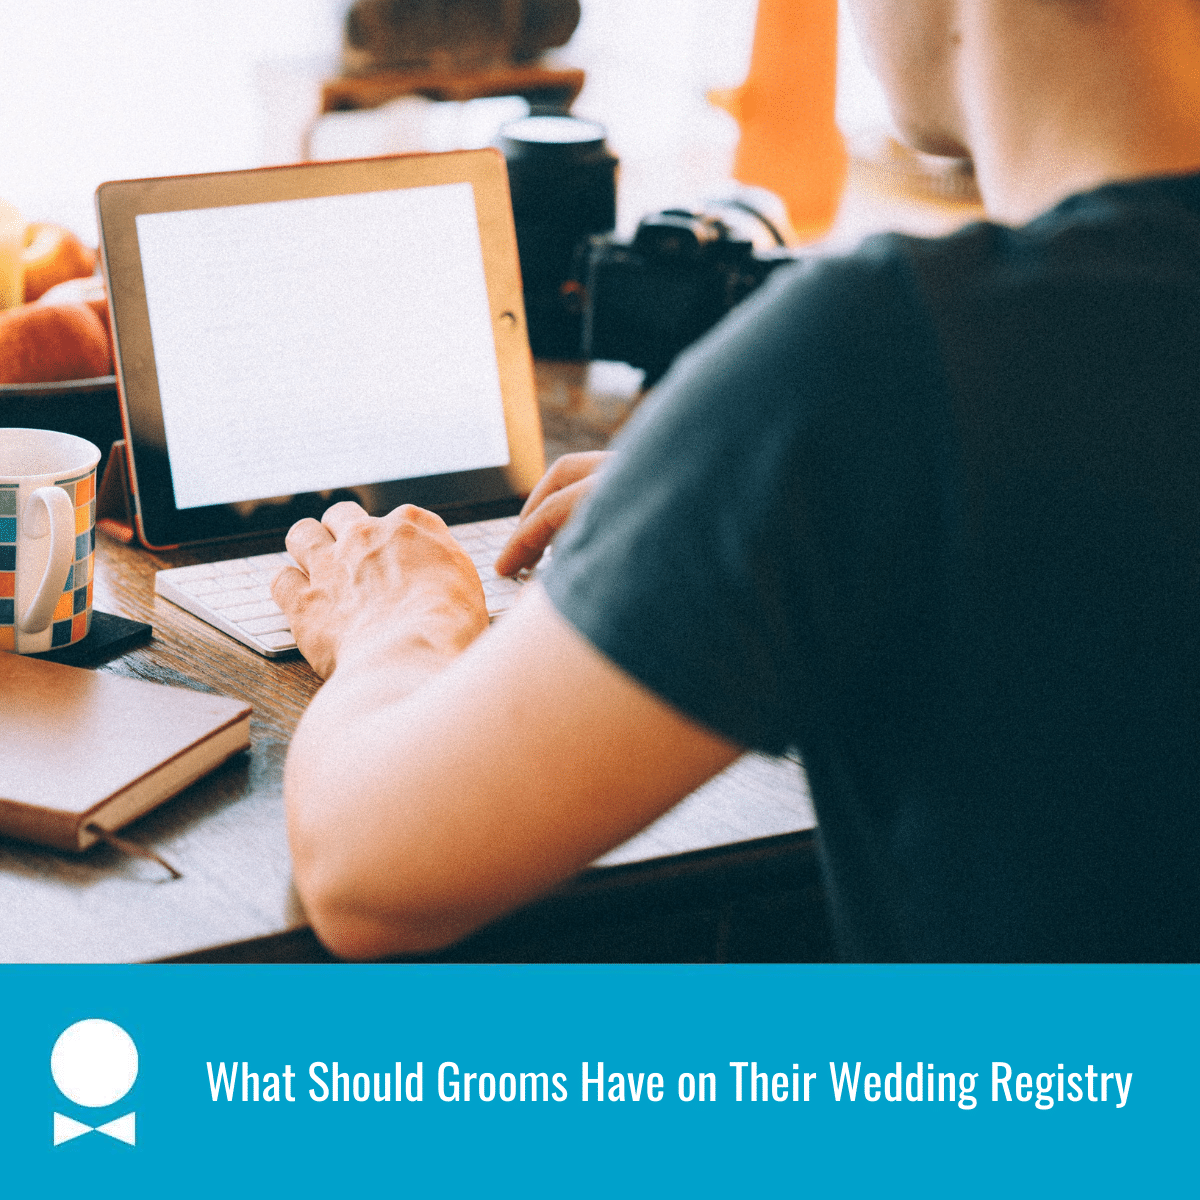 What Should Grooms Have on Their Wedding Registry - The Man Registry